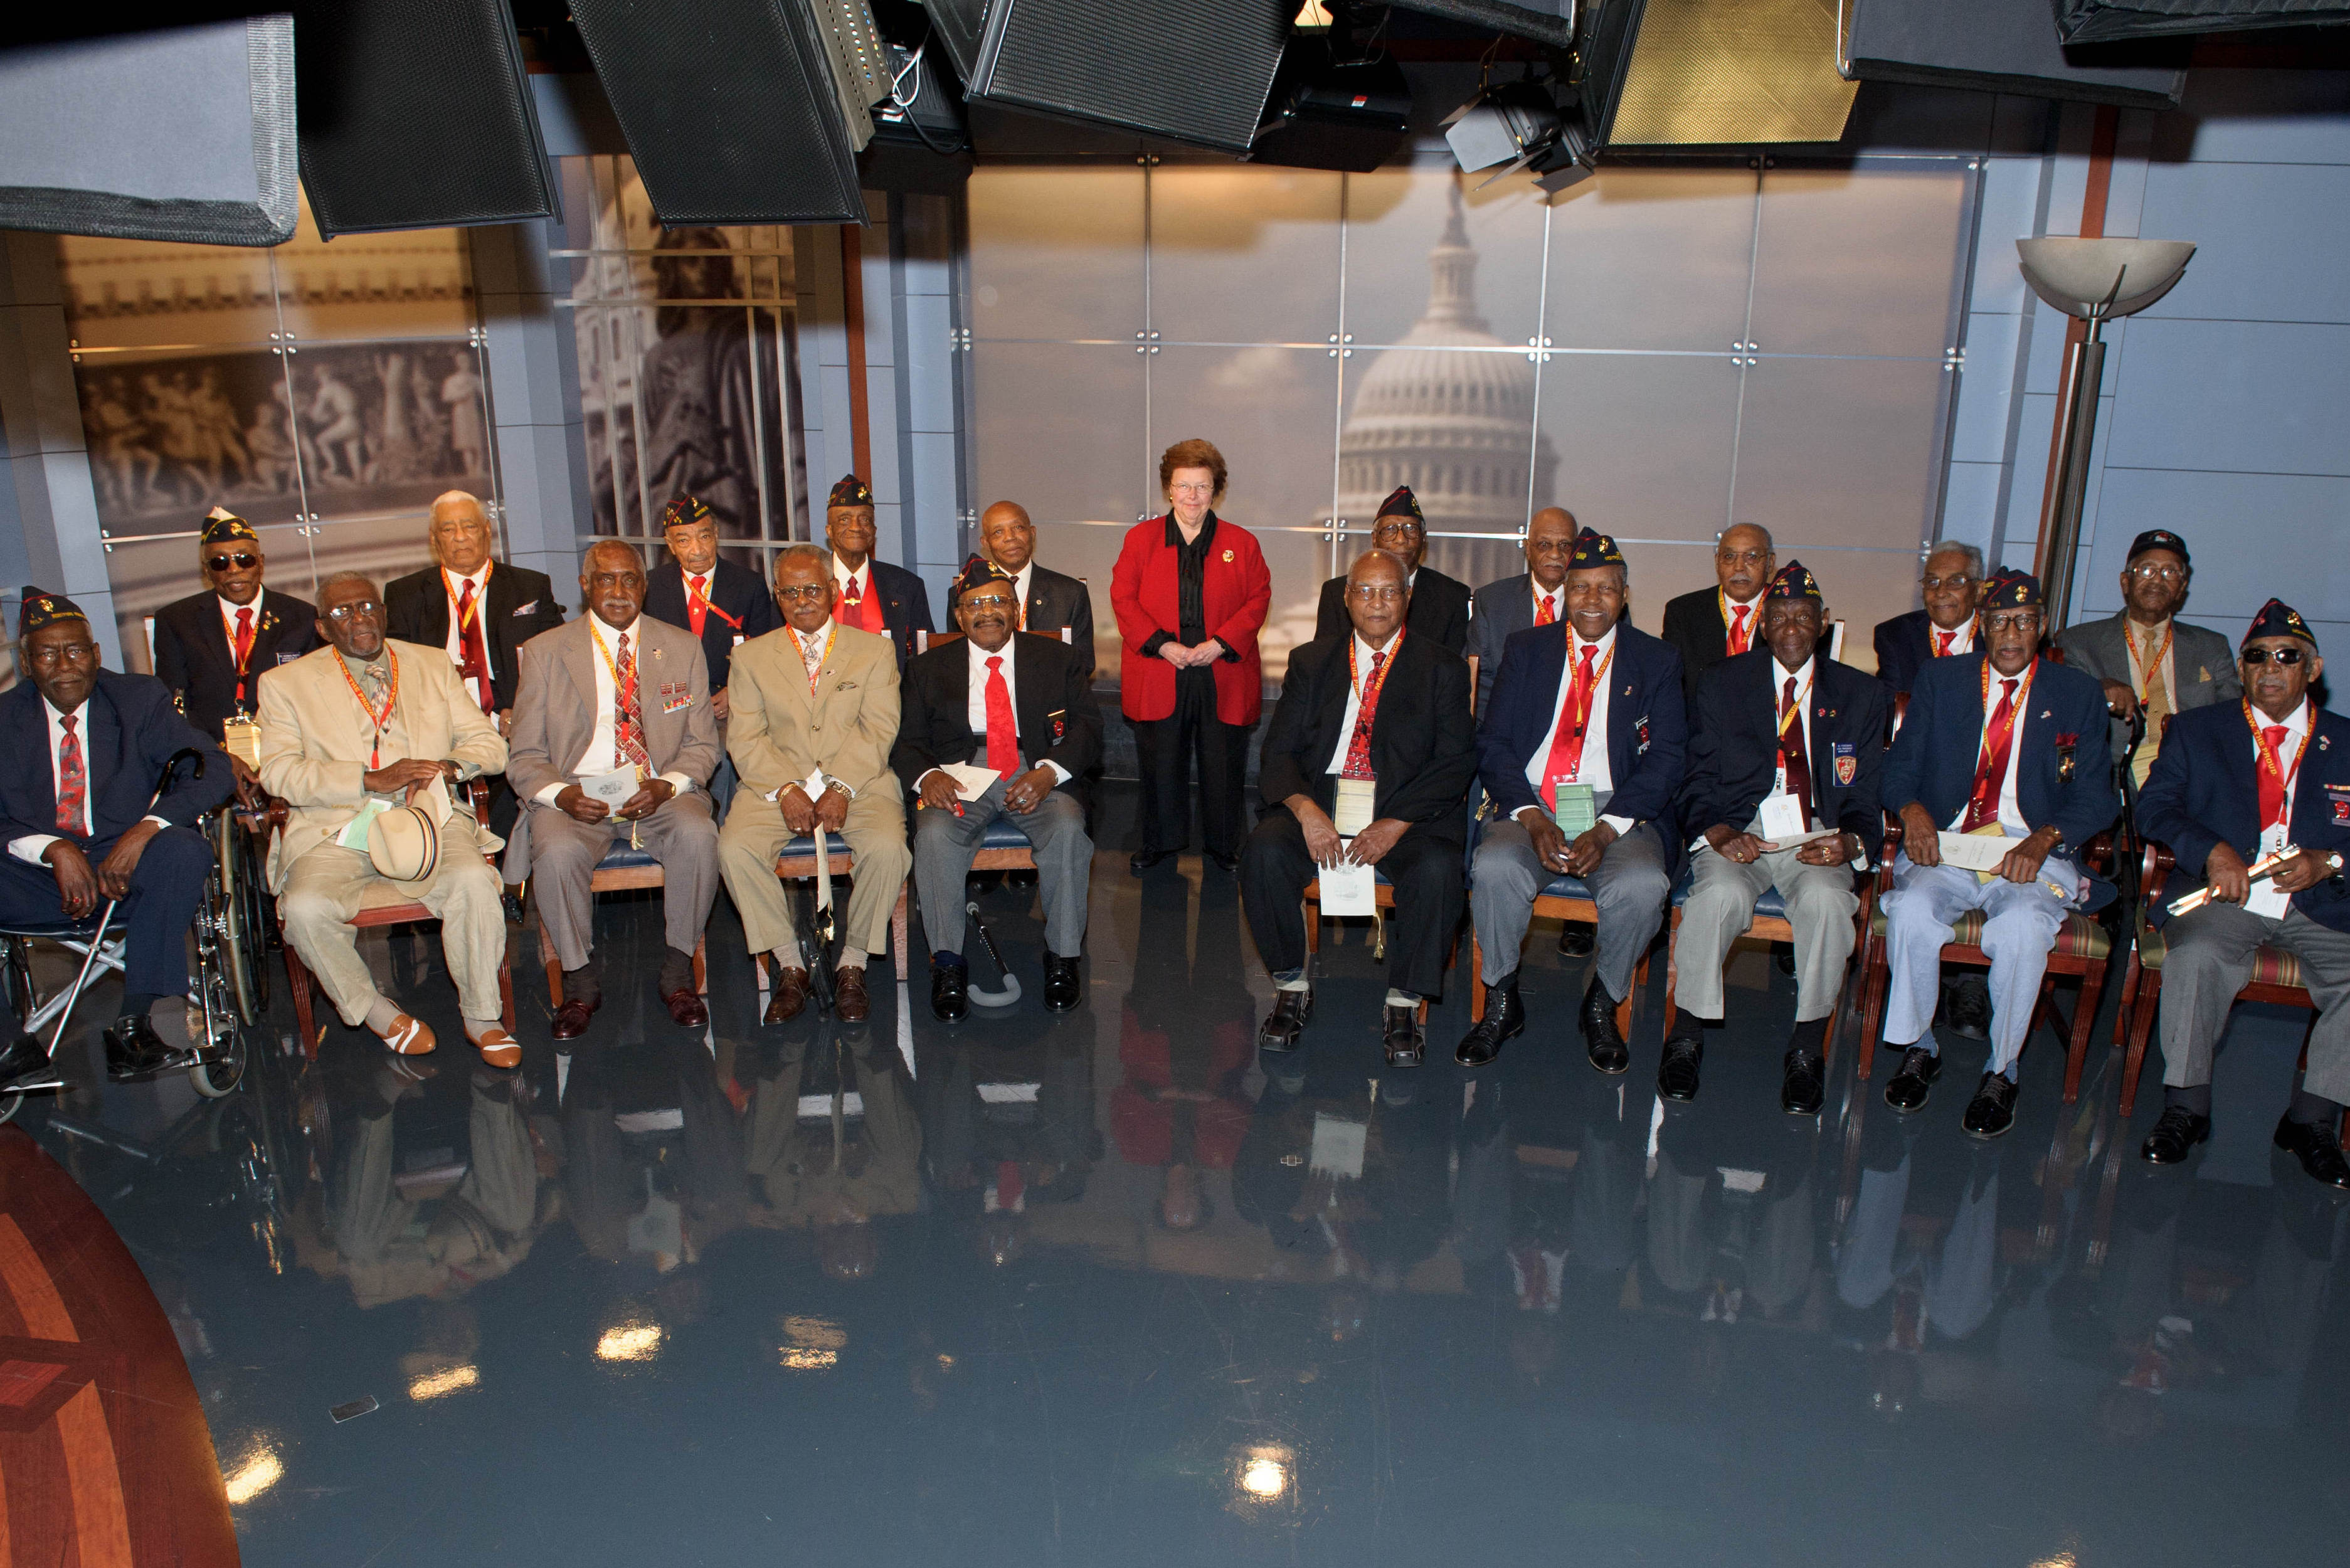 Mikulski Meets with Maryland Montford Point Marines